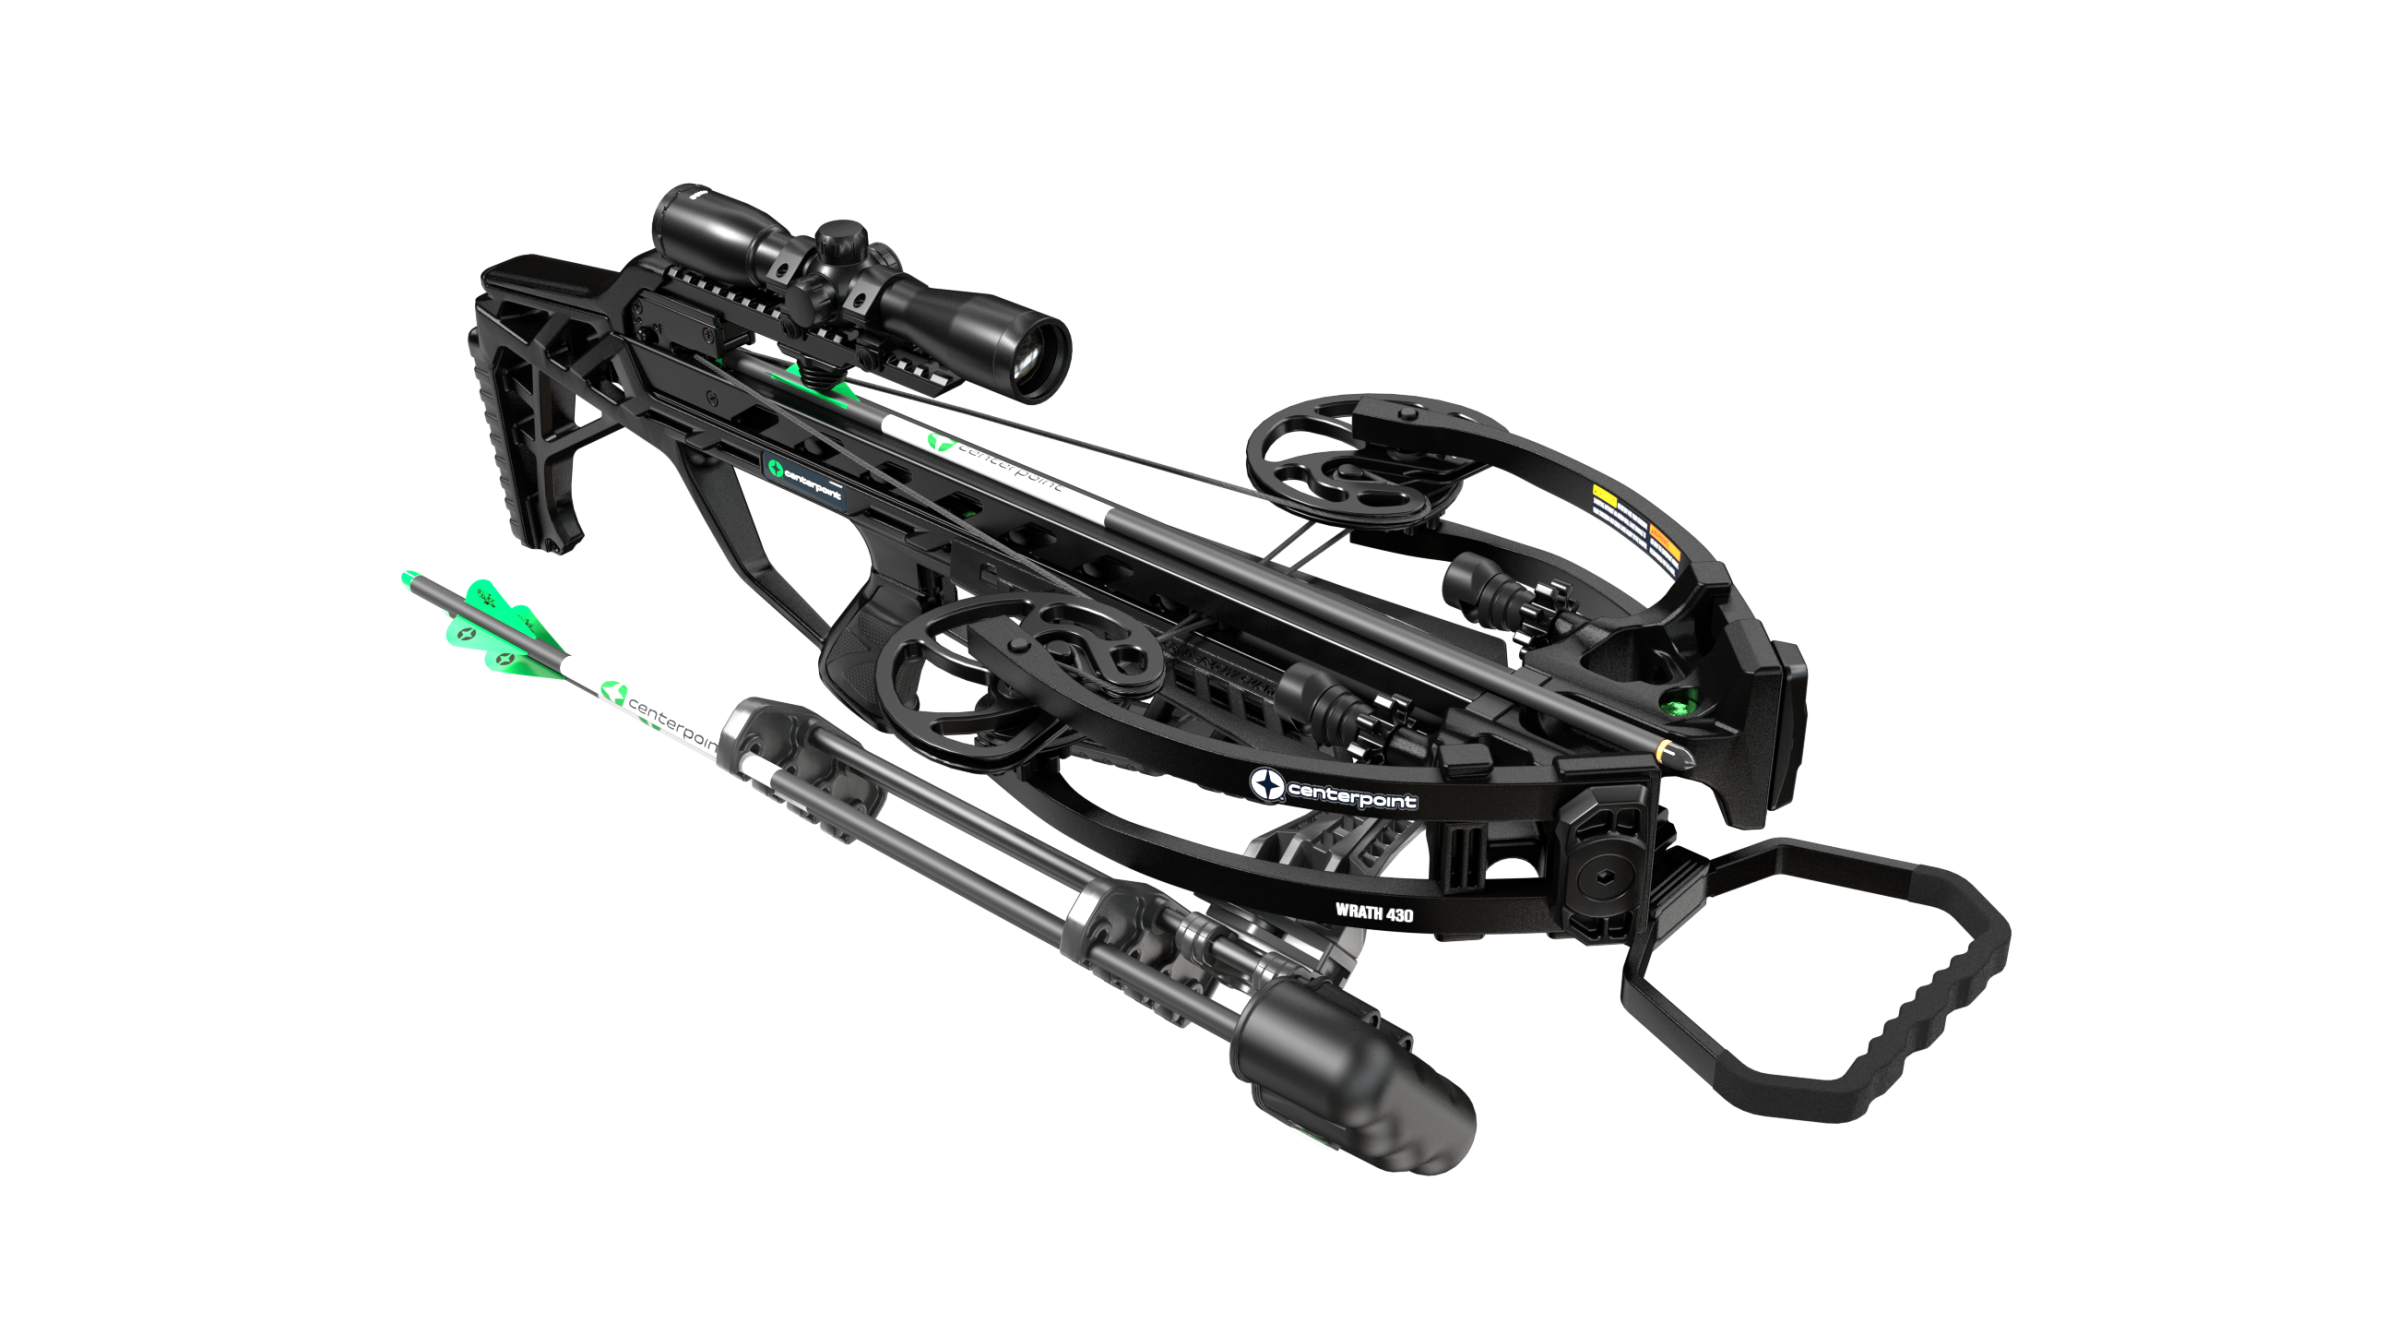 The Centerpoint Wrath 430 is a best crossbow for the money